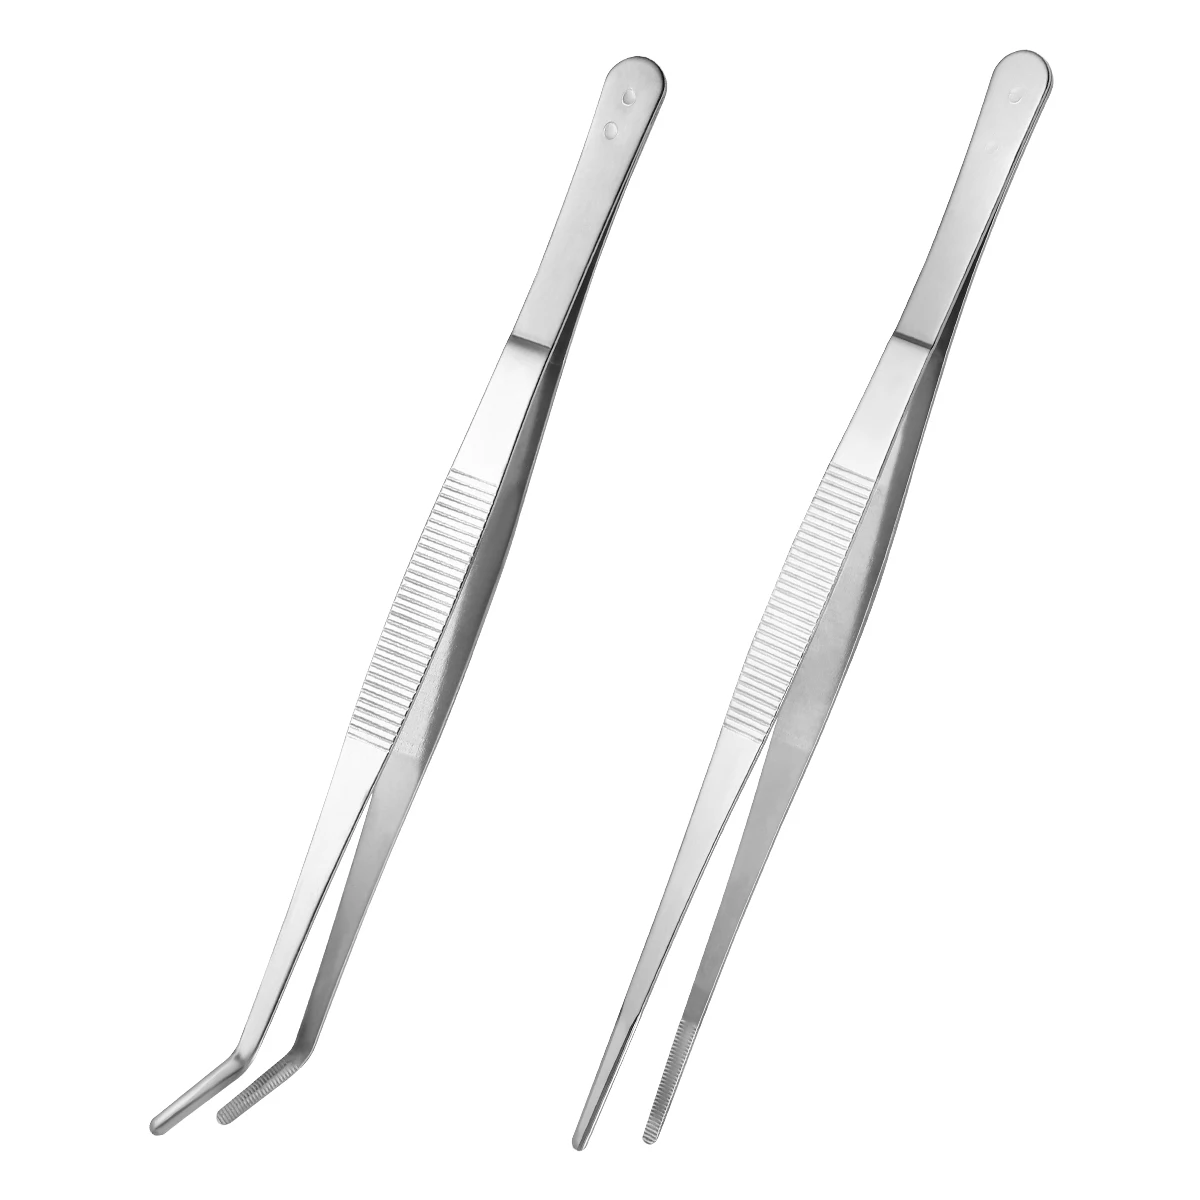 2pcs Stainless Steel Straight and Curved Nippers Tweezers Feedin